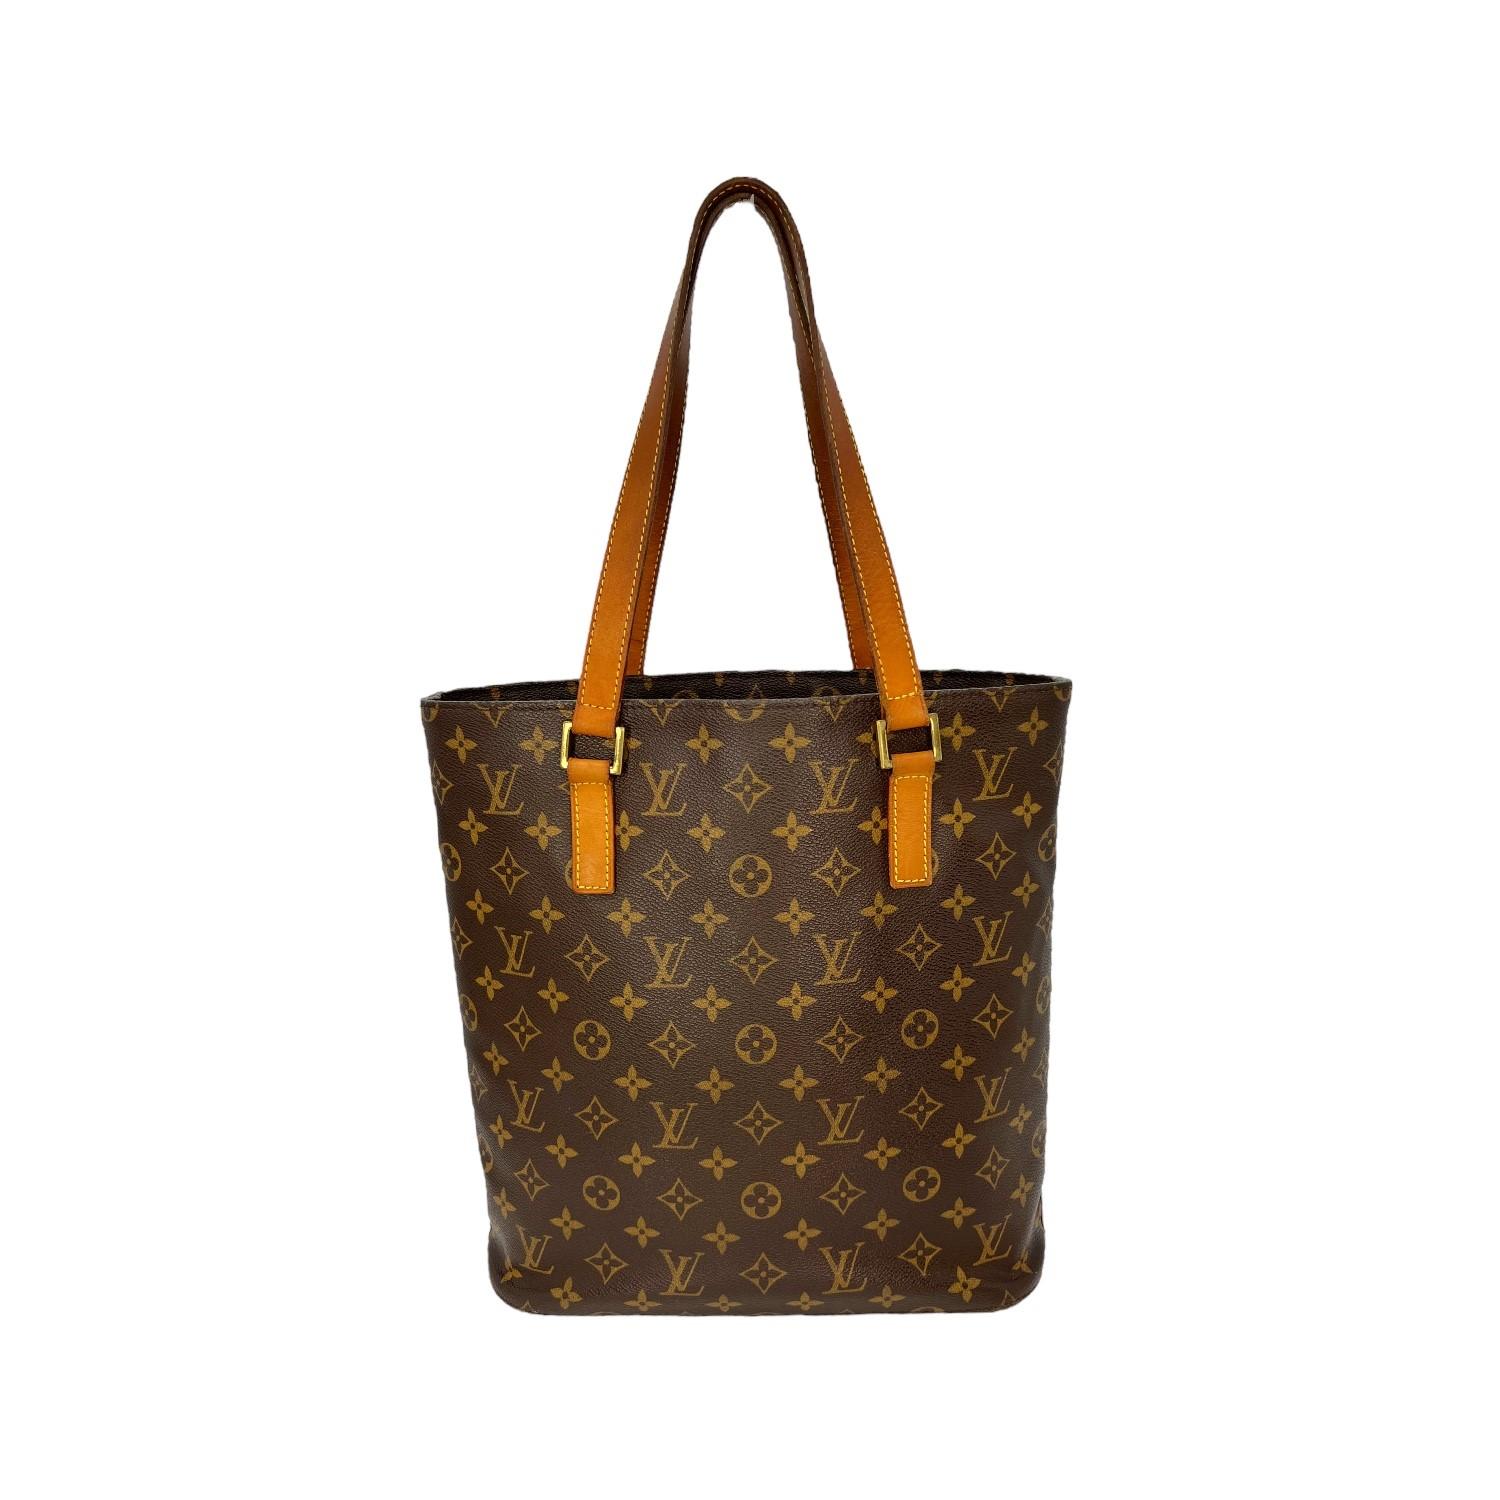 This Vintage Louis Vuitton Monogram Canvas Vavin GM Bag has a unique and modern structure which is perfect for an everyday carryall. It is the largest member of the Vavin family which is big enough to hold all your daily essentials is style. 